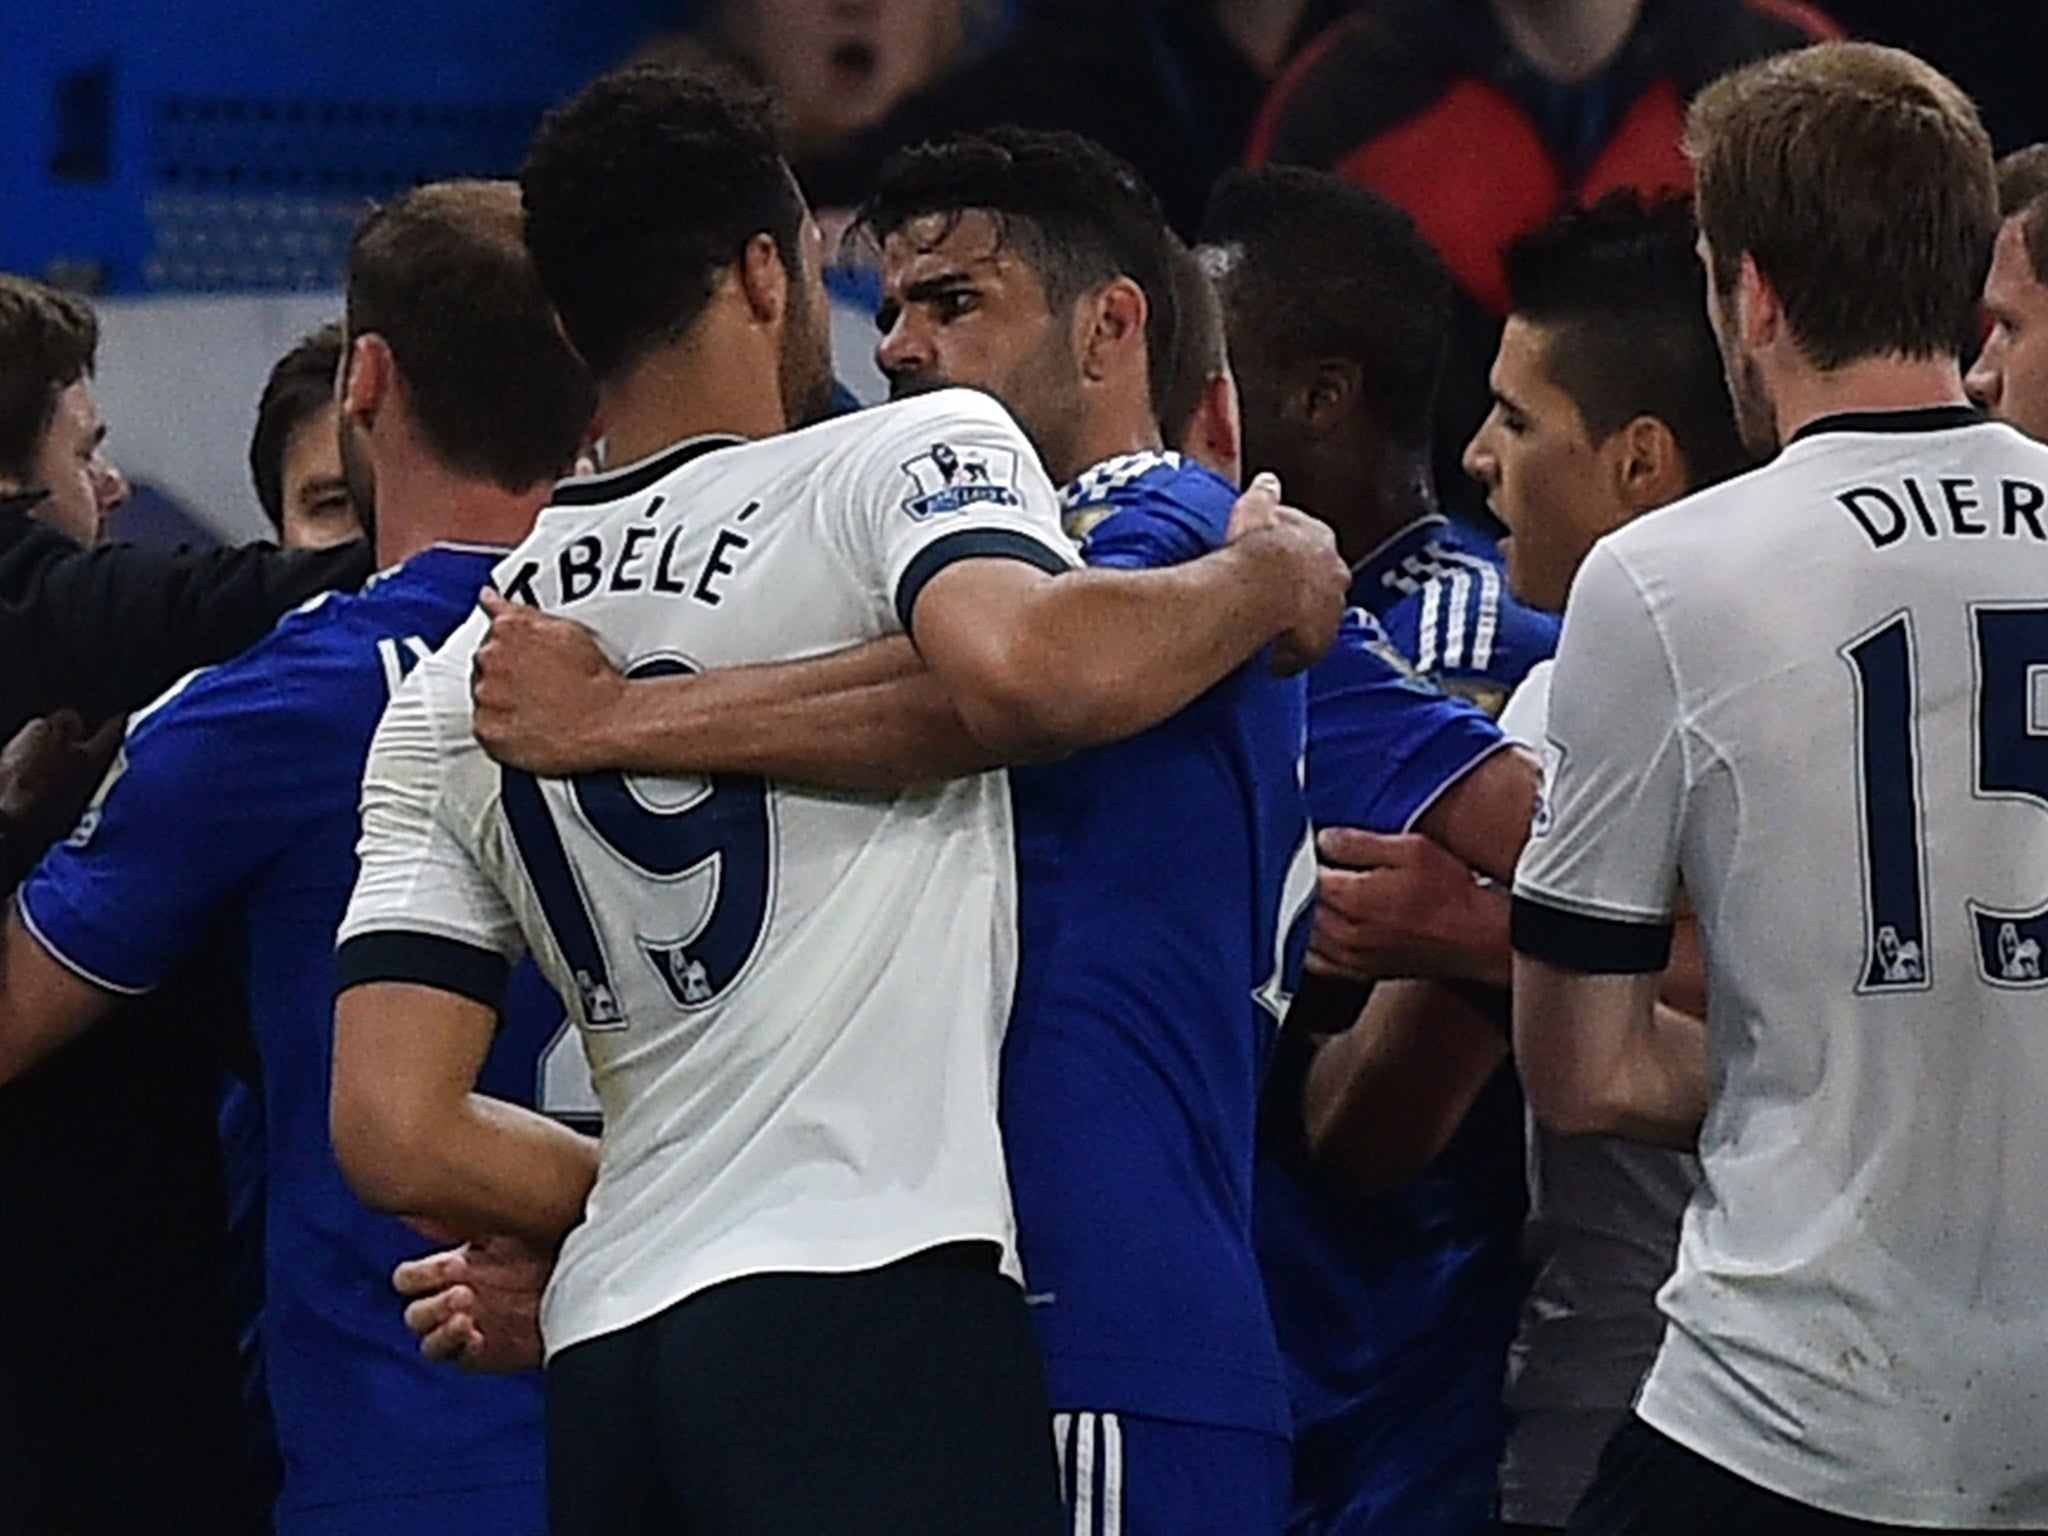 Mousa Dembele appeared to eye-gouge Diego Costa during Tottenham's 2-2 draw with Chelsea